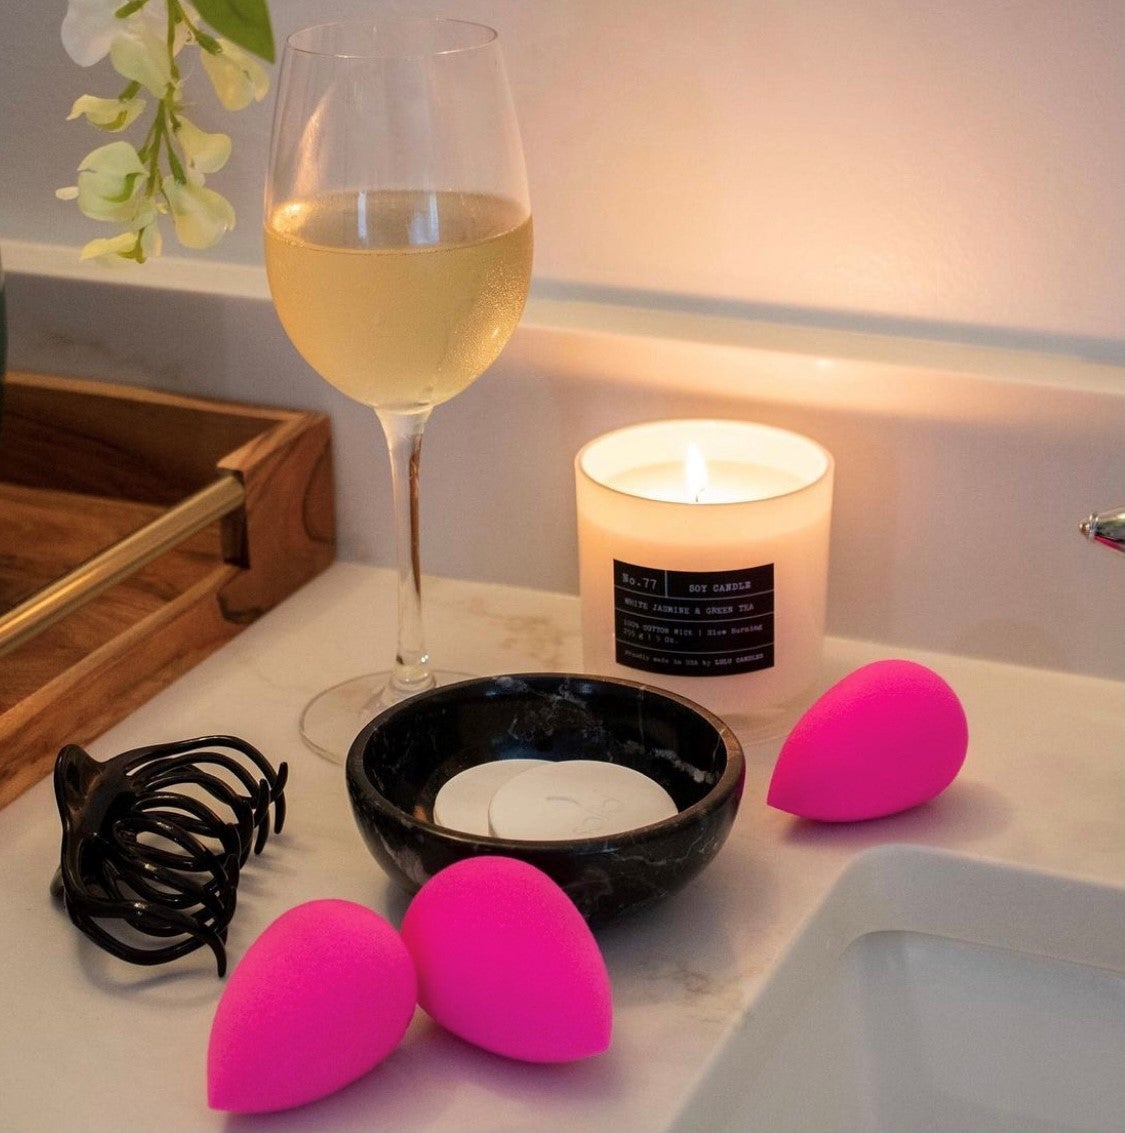 beauty blenders surrounded by candles and wine